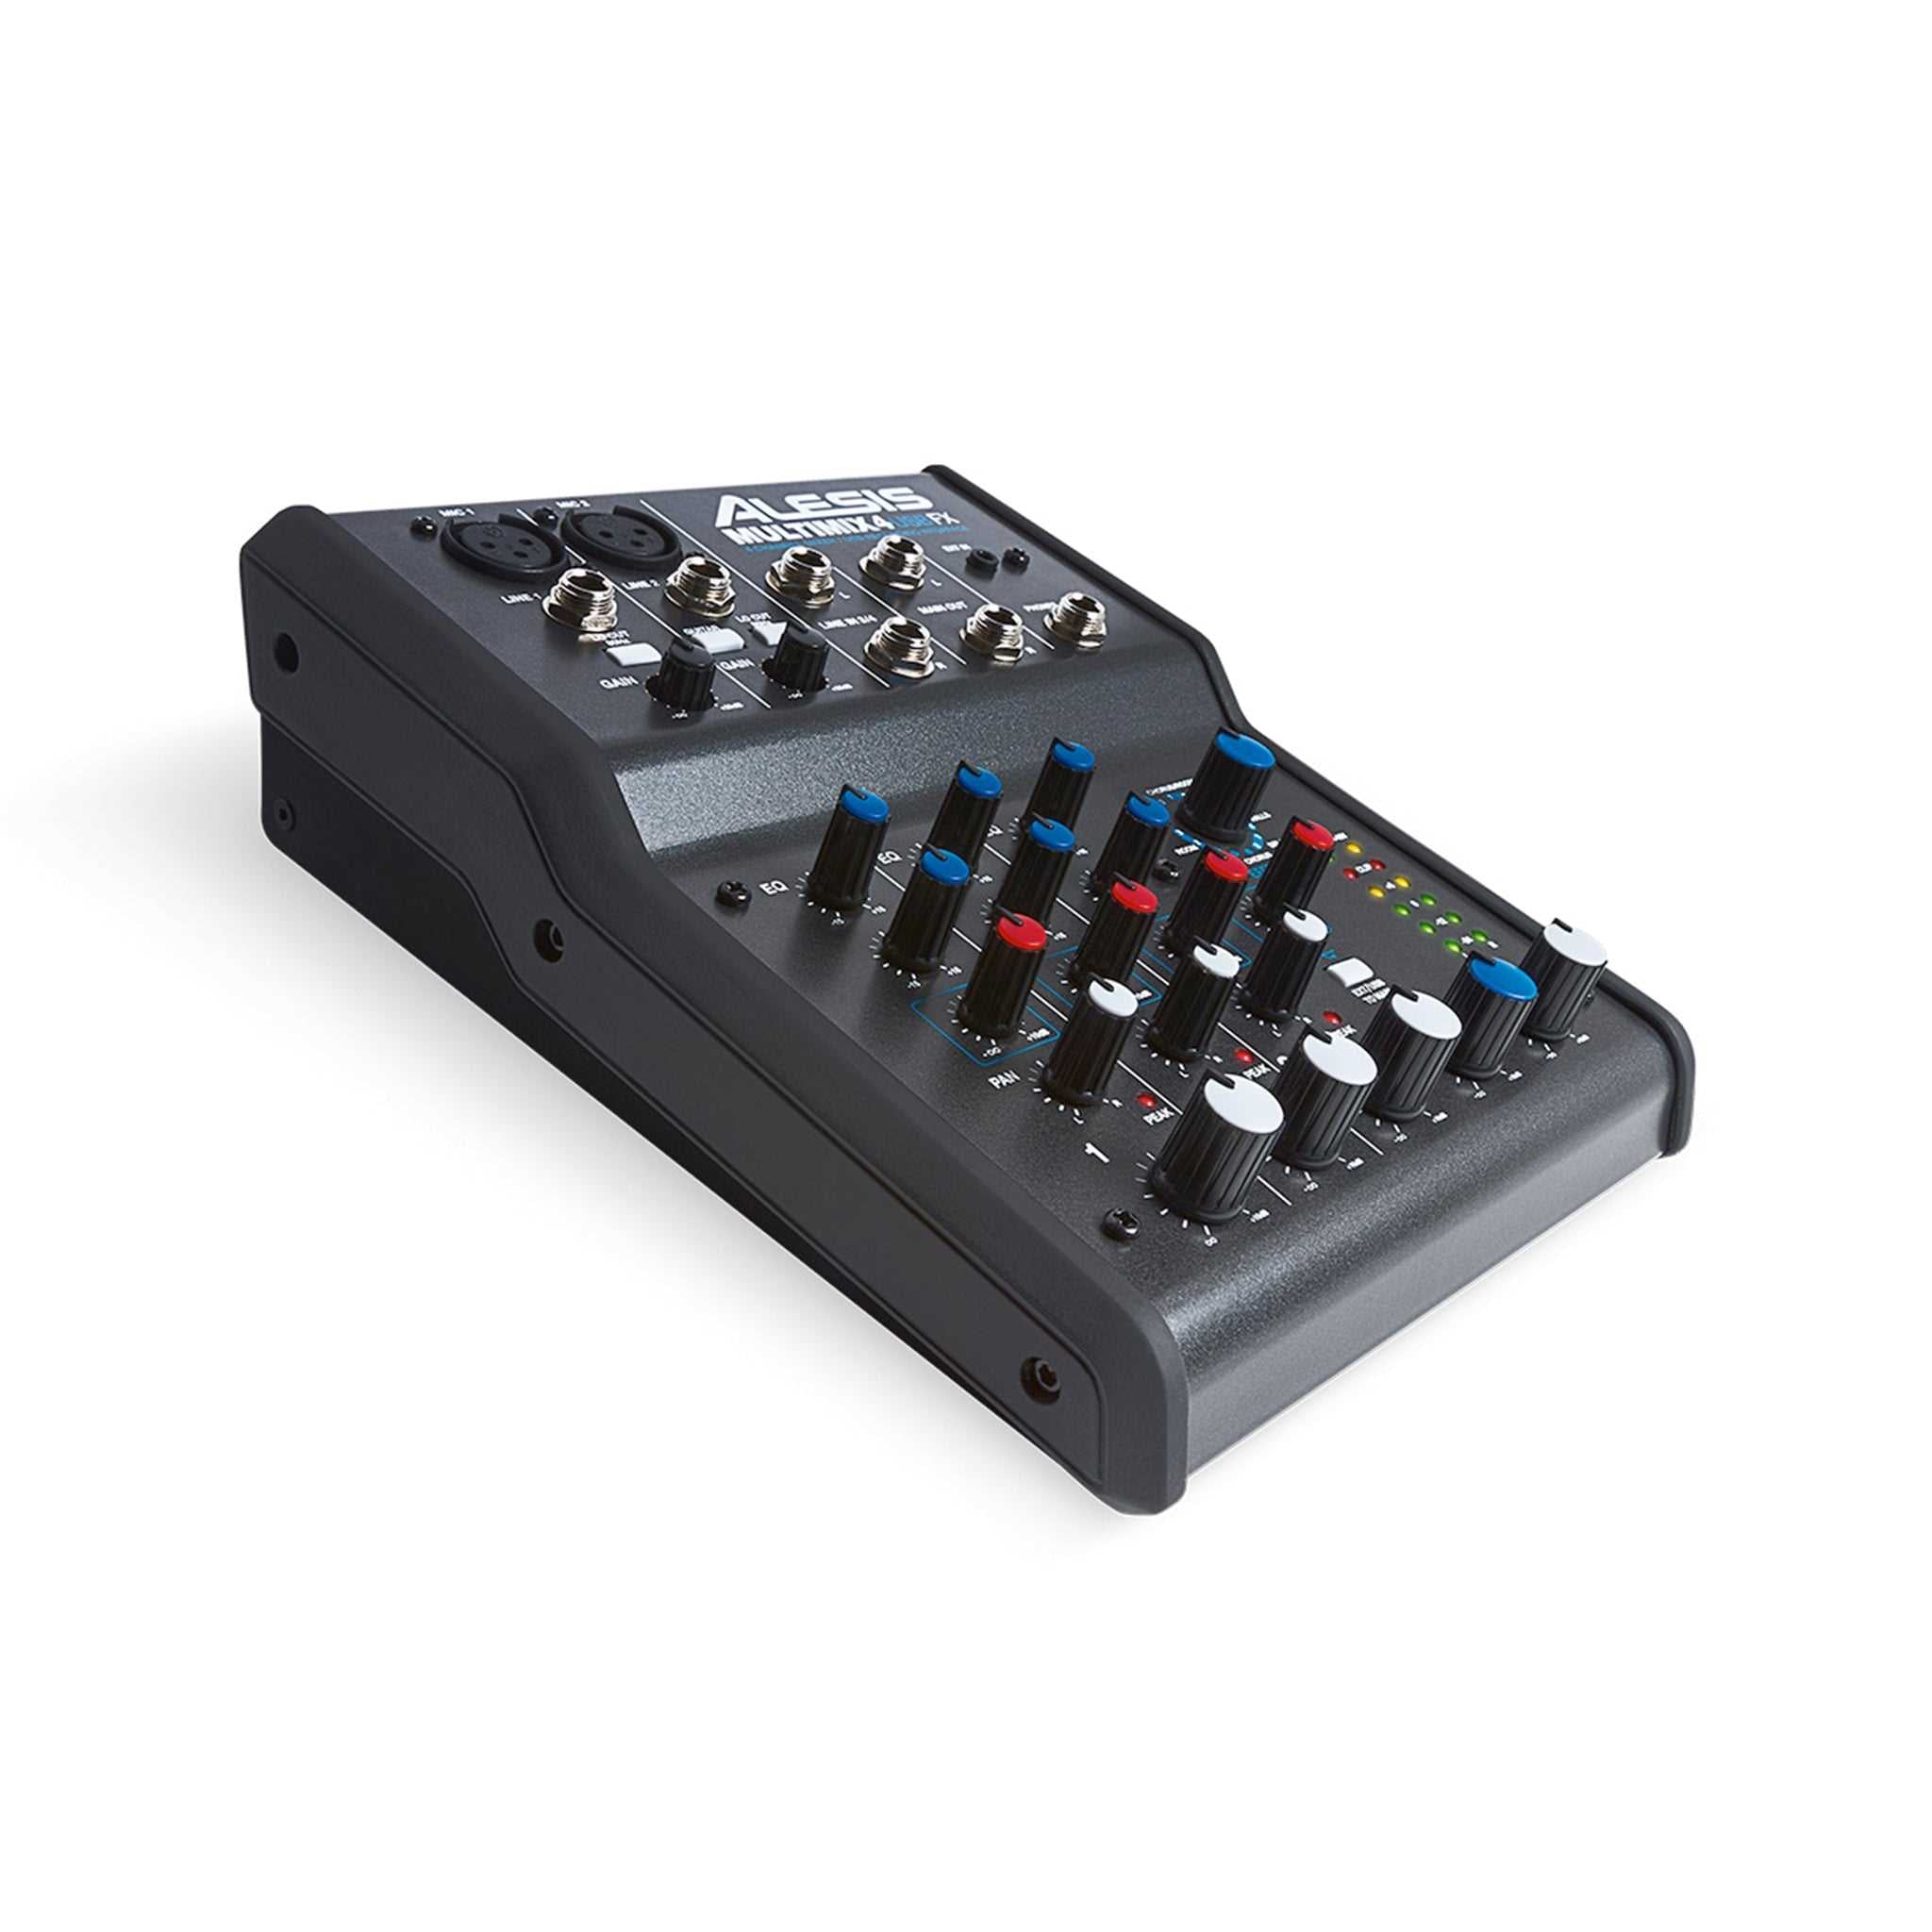 Alesis MultiMix 4 USB FX Four-channel Mixer with Effects and USB Audio